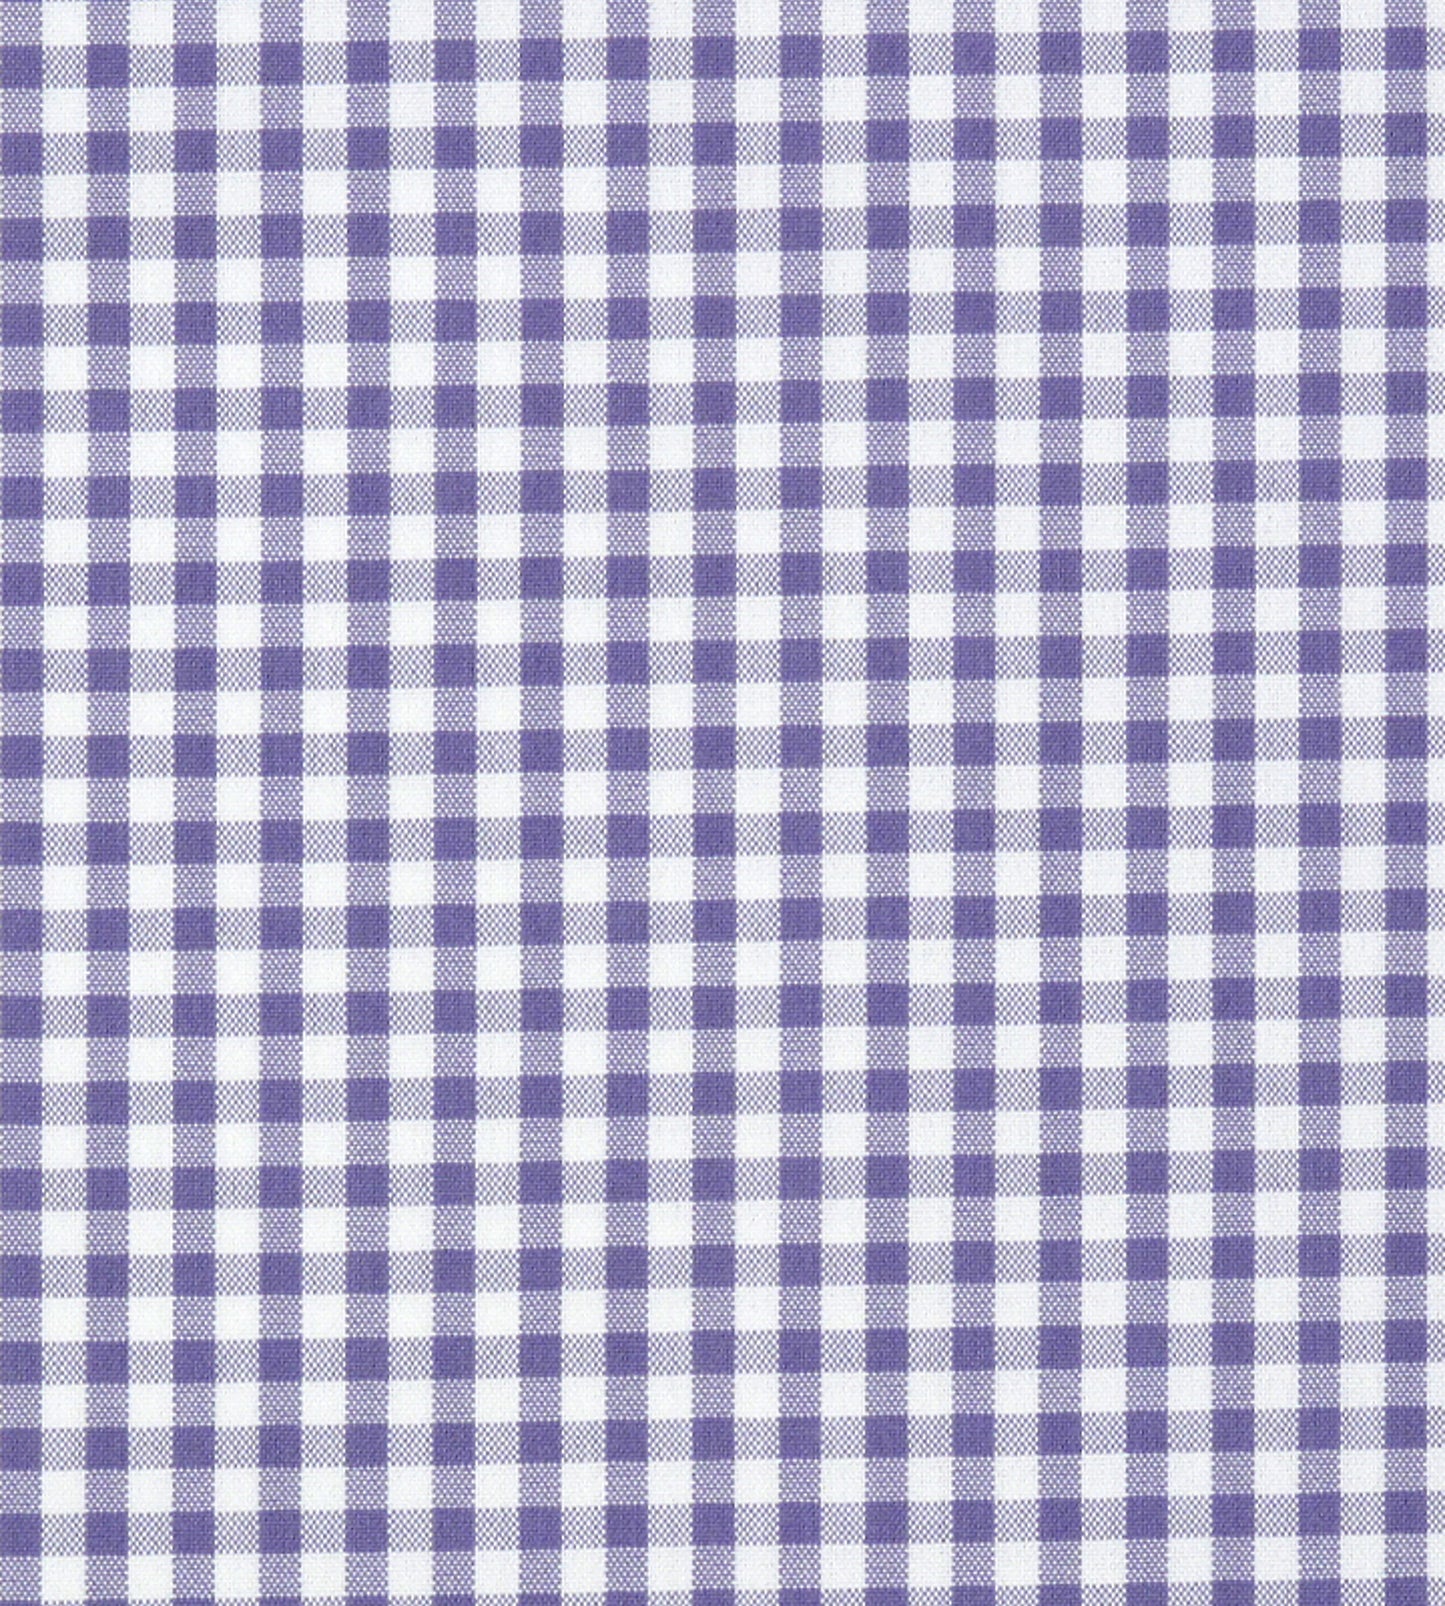 Purchase Old World Weavers Fabric Pattern number F3 00083018, Poker Check Lavender 1